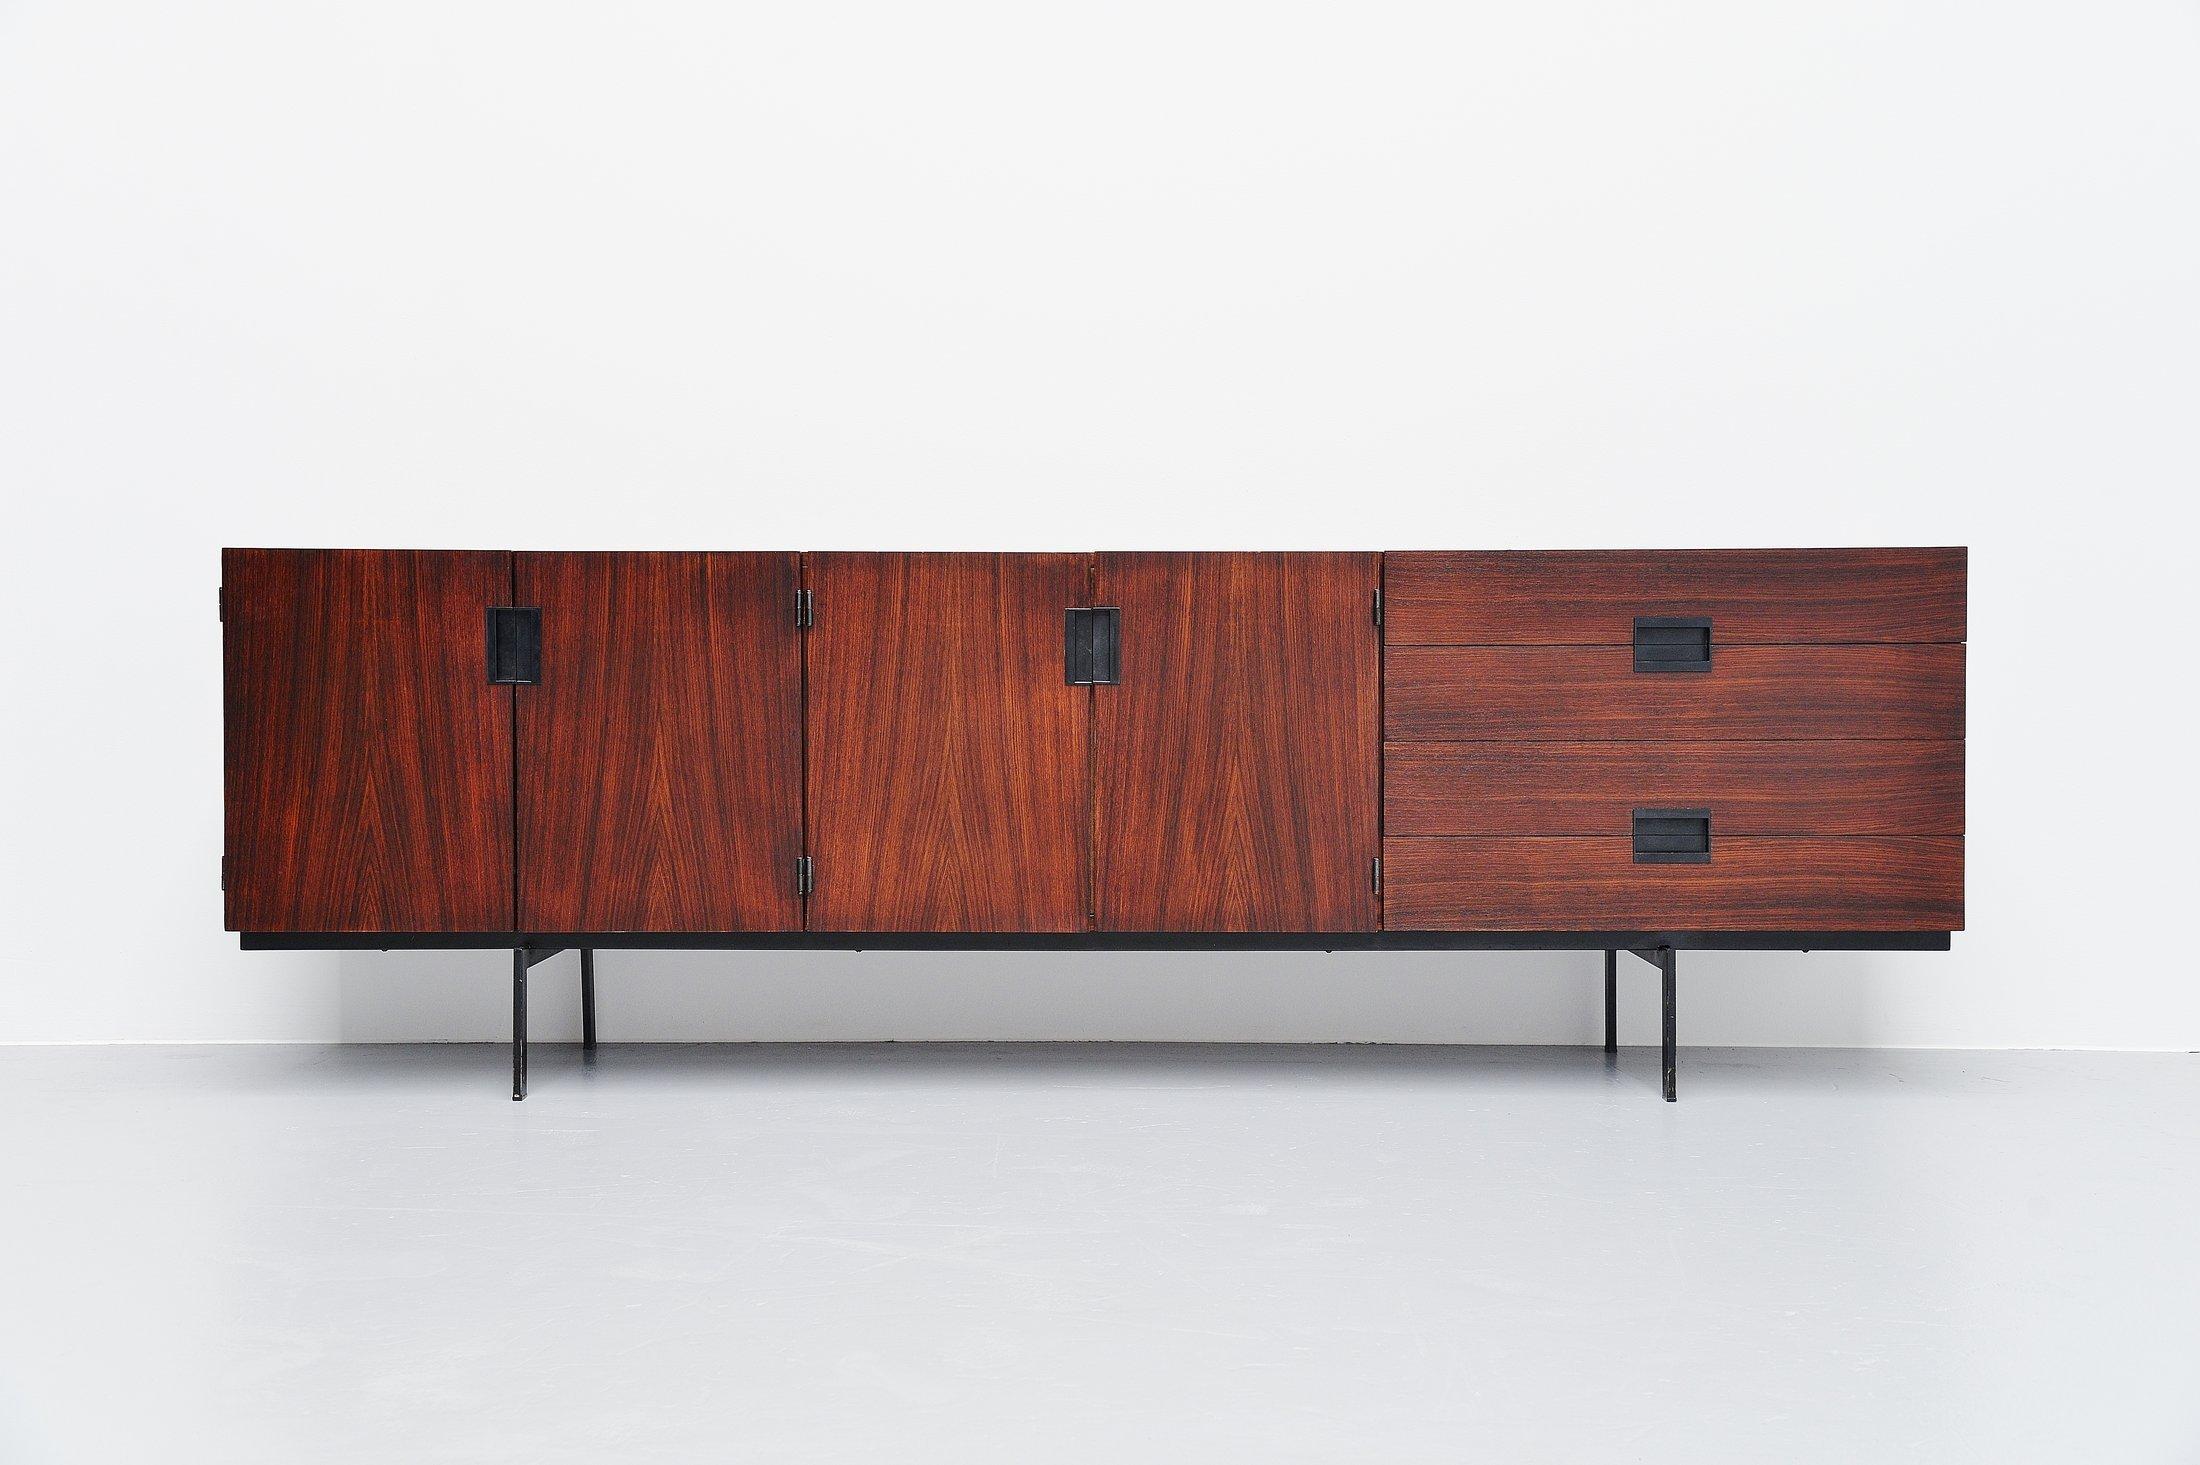 This is for a super rare custom made sideboard model DU03, designed by Cees Braakman and manufactured by Pastoe UMS, Holland, 1958. This unique sideboard is made of rosewood and has a black lacquered metal frame. The Japanese series by Pastoe could